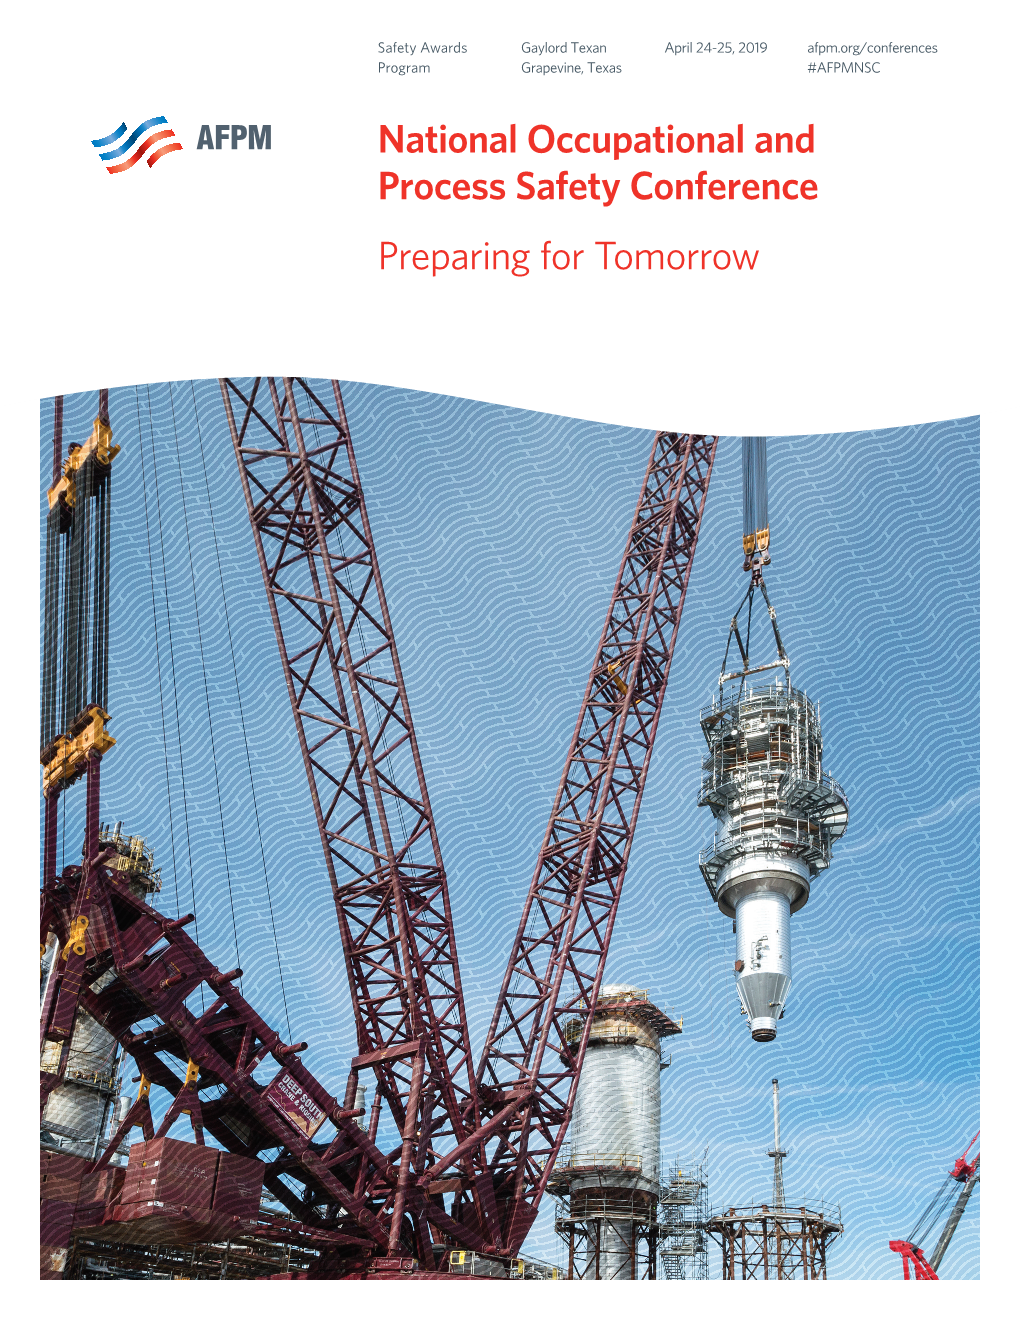 AFPM 2019 National Occupational and Process Safety Conference